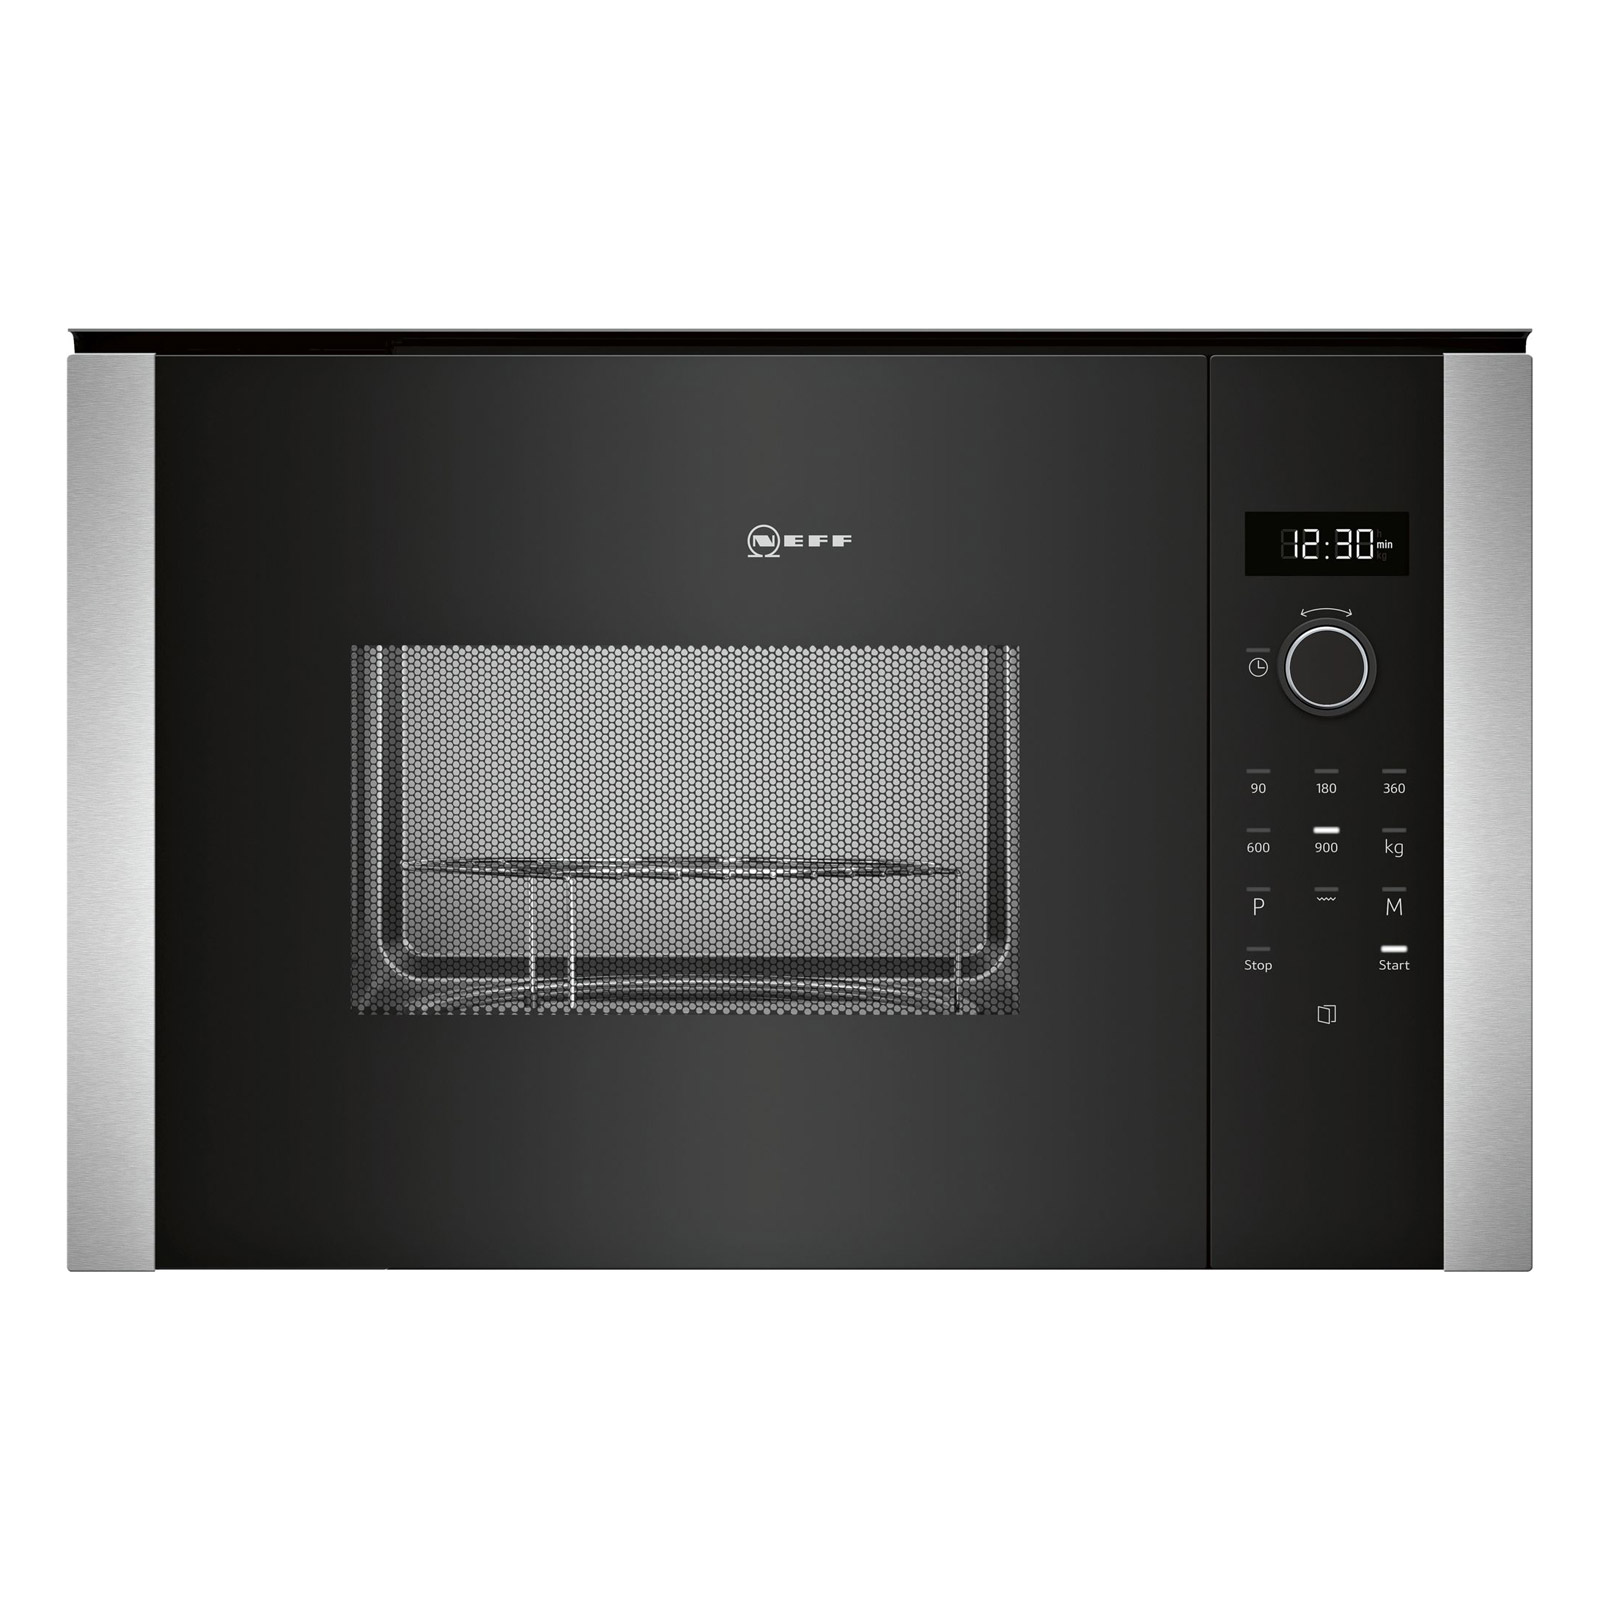 Neff HLAGD53N0B N50 Built In Microwave Oven Grill in Black 900W 25L